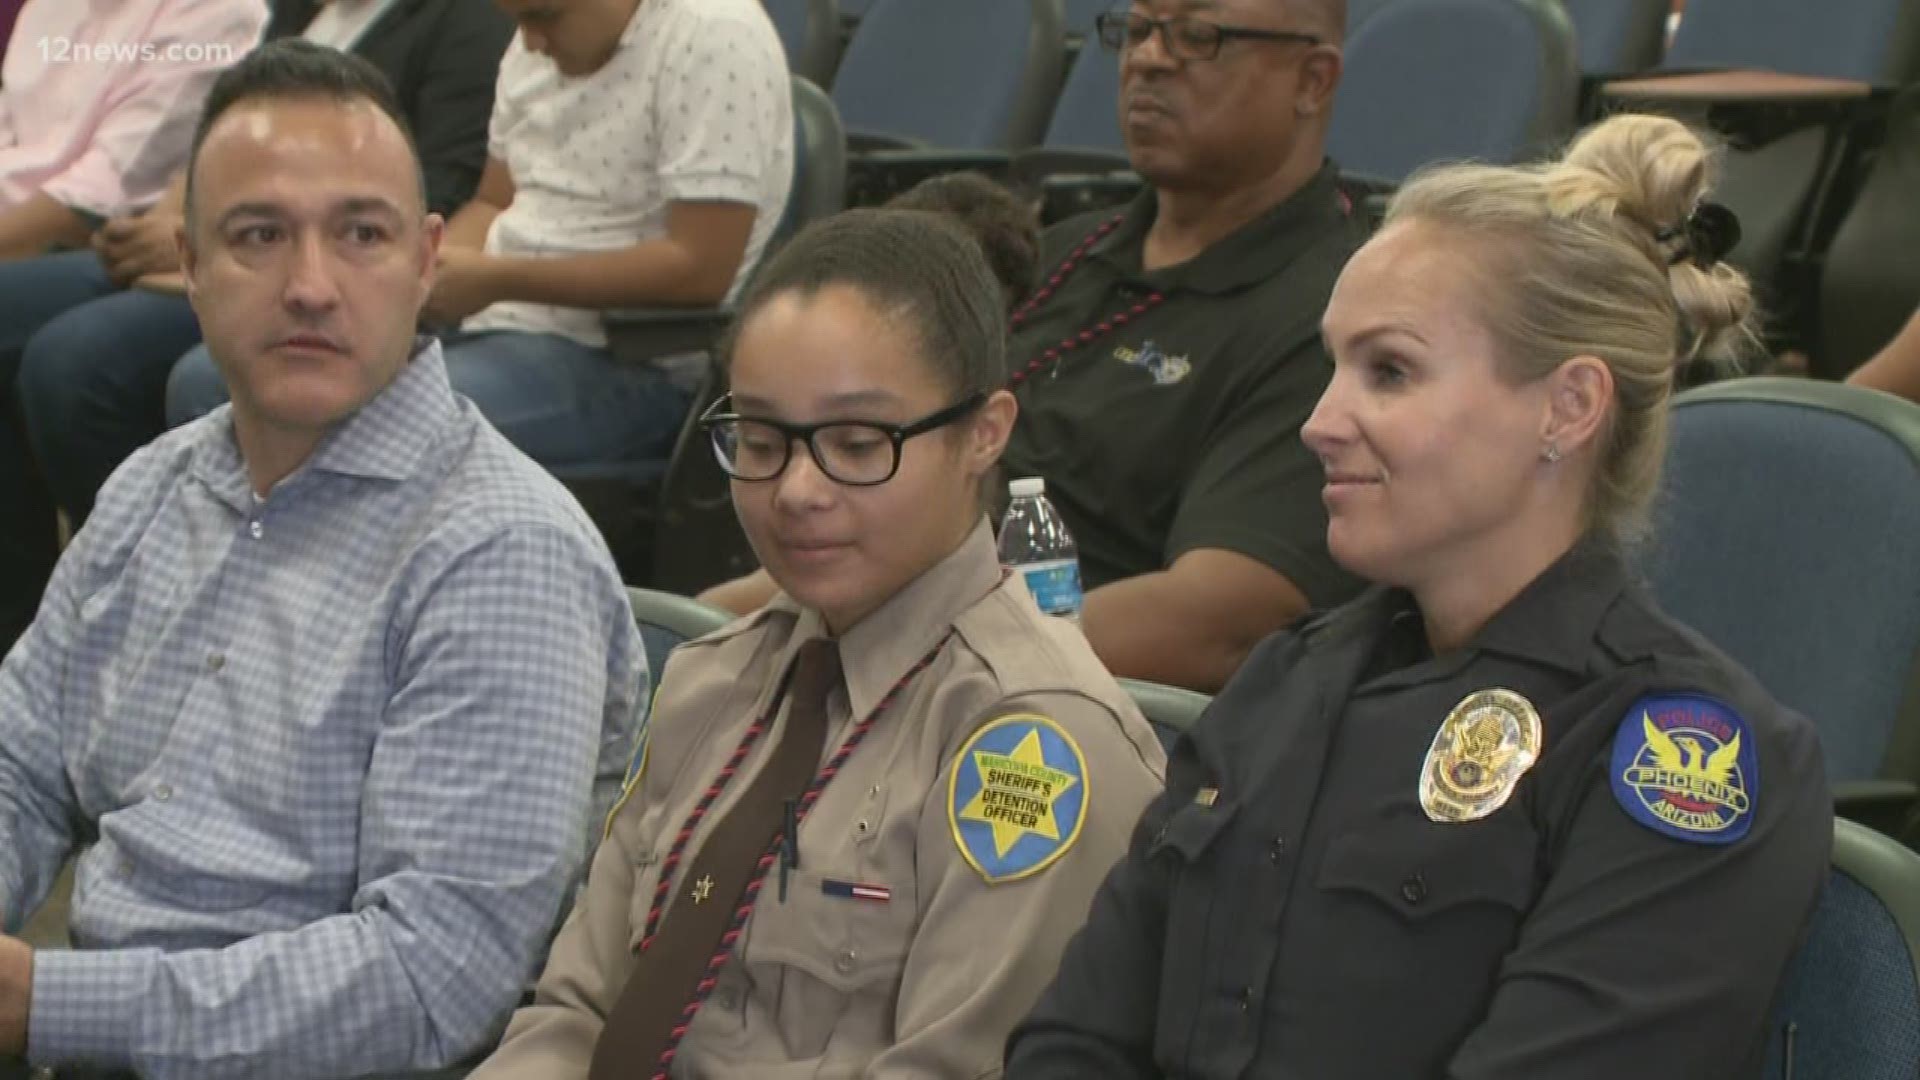 Sheriff Paul Penzone launched a three-week boot camp that gives south and central Phoenix teens who are about to enter adulthood an introduction to law enforcement last year. Completion of the program comes with a perk, a check for $450. The camp comes at a time when mistrust of law enforcement has once again flared up in the Valley, and these students are learning what it's like to wear the uniform.